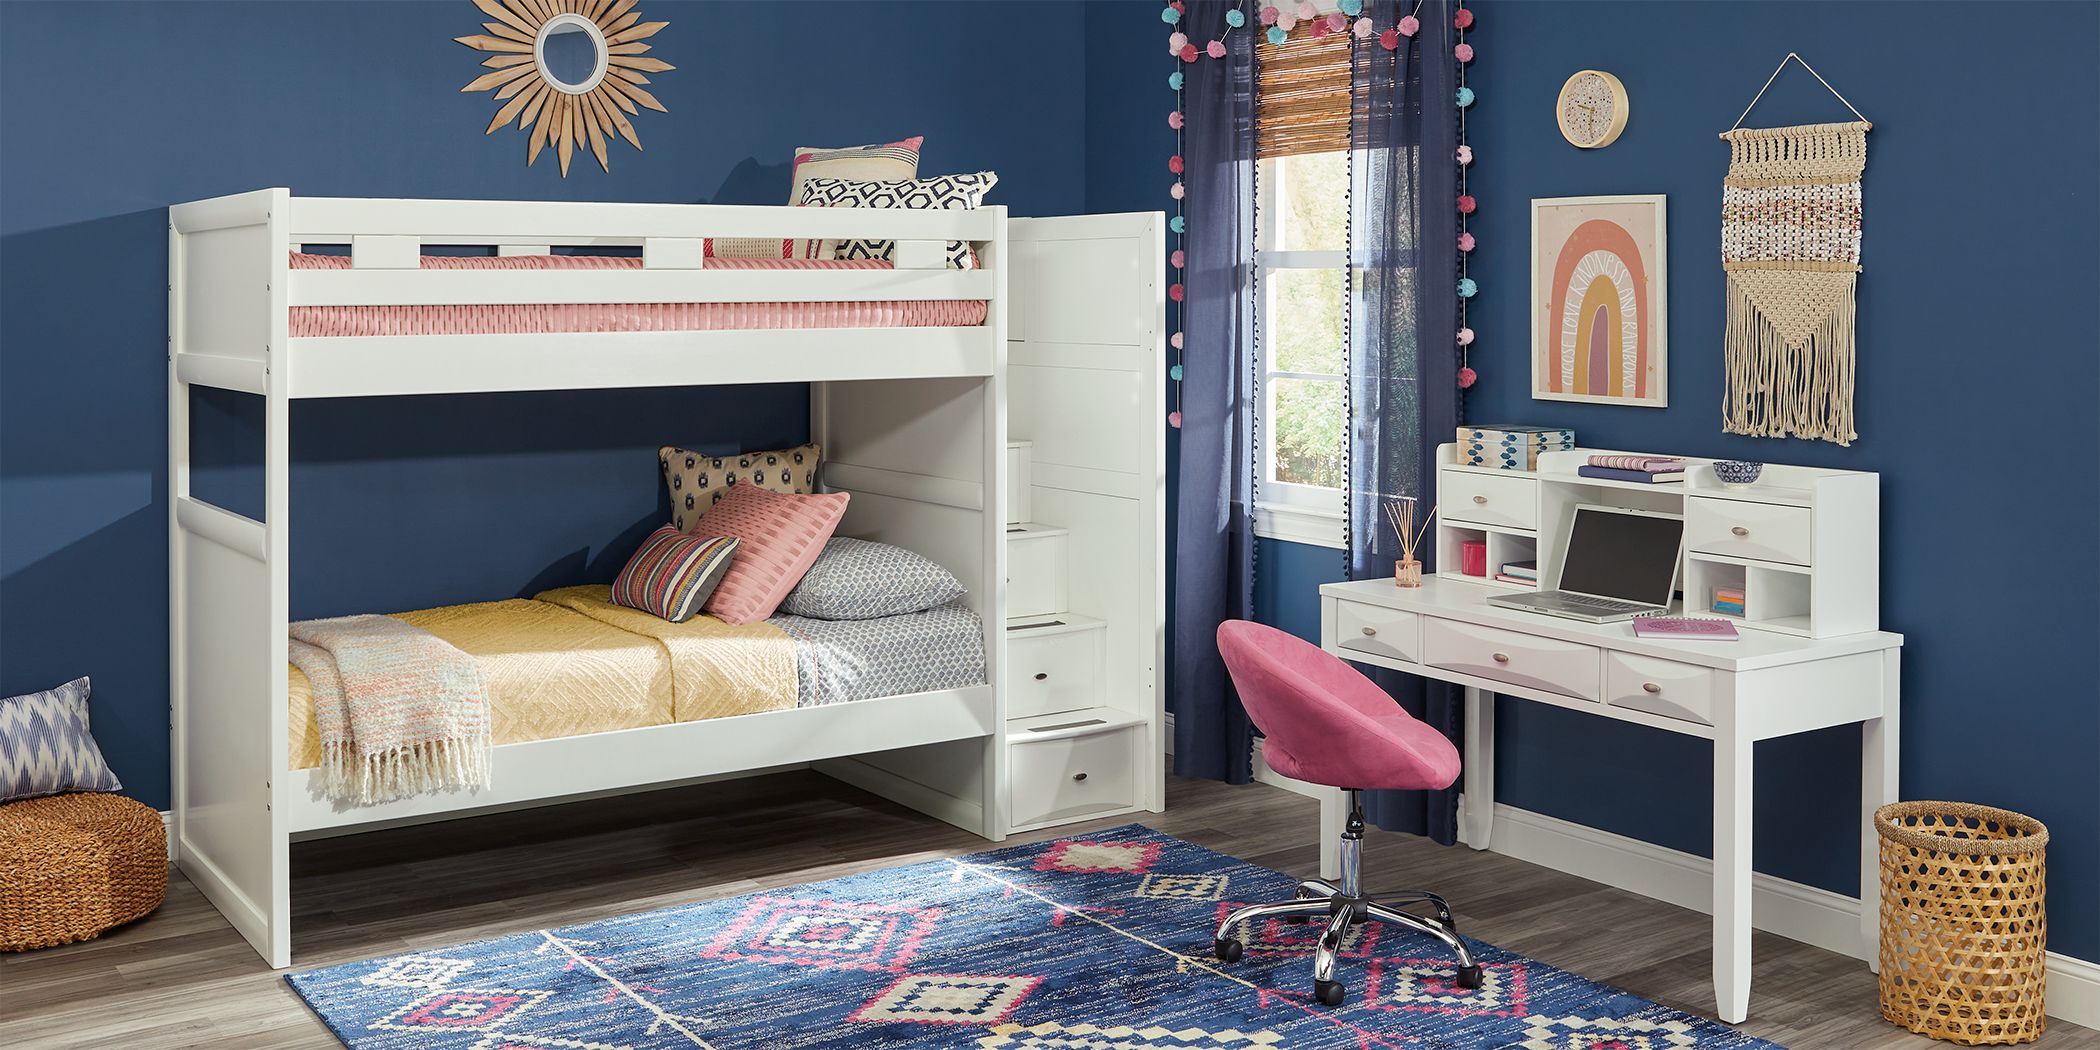 Ivy League Furniture Collection, Ivy League Twin Step Bunk Bed